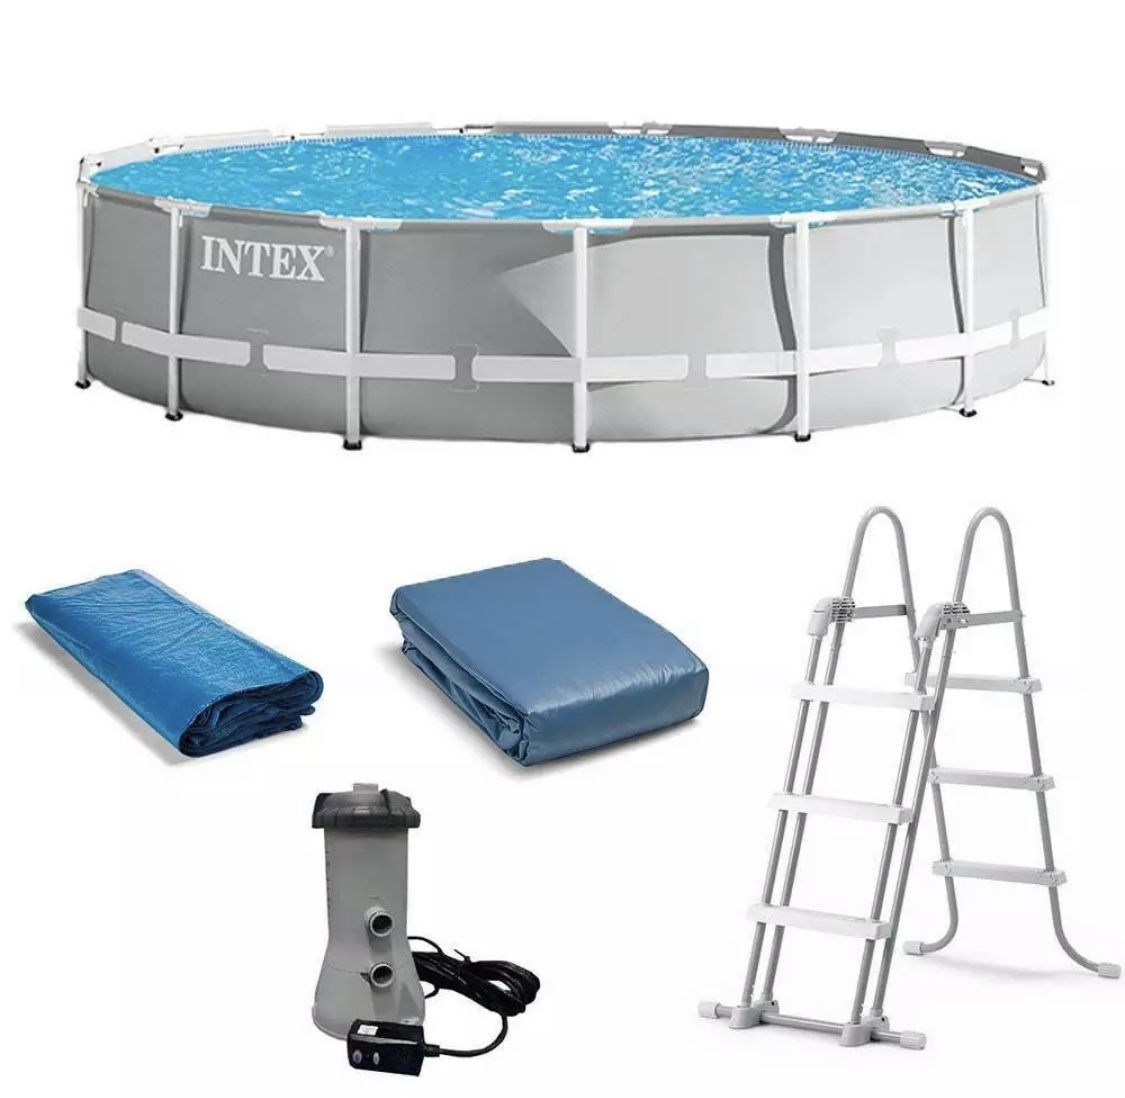 Intex 26723EH 15ft x 42in Prism Frame Above Ground Swimming Pool Set with Filter Pump and Ladder